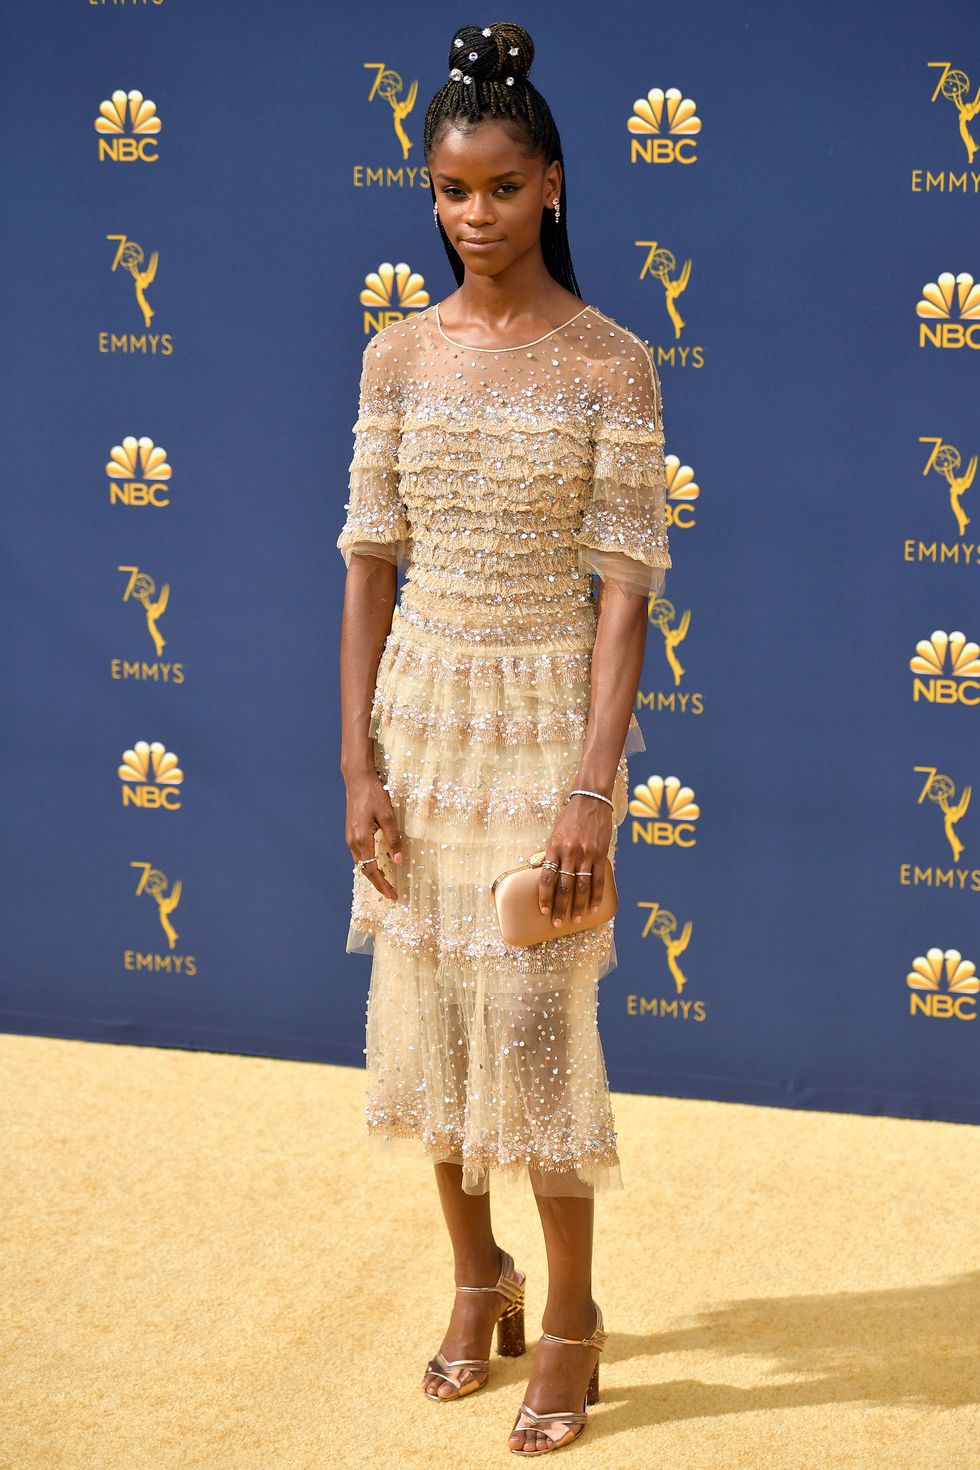 Our Favourite Red Carpet Looks from the 2018 Emmy Awards